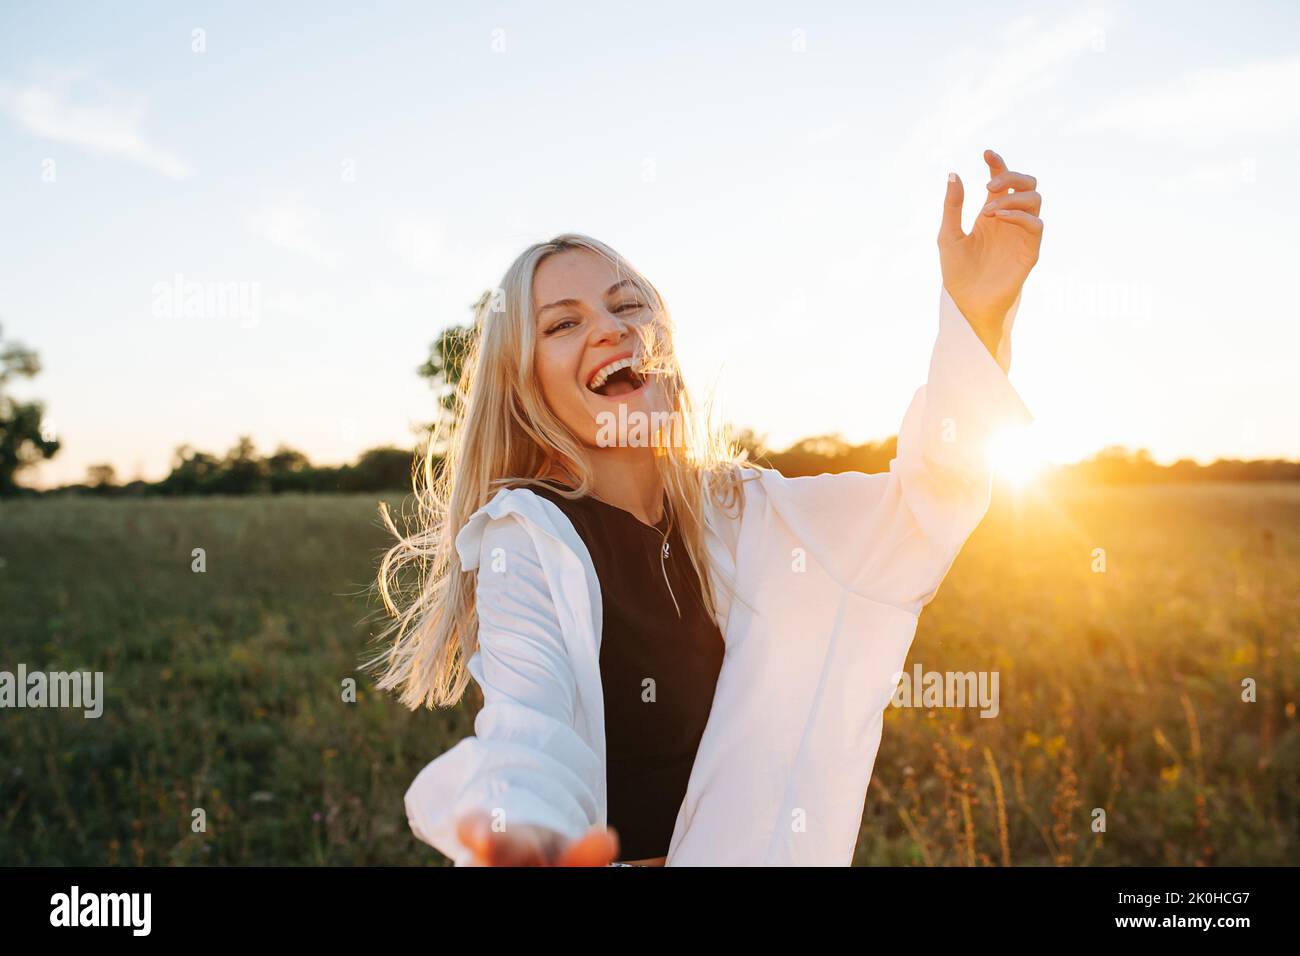 Cheerful young blond woman standing amidst wheat field. Reaching with her hand. Against setting sun, lit with soft bright orange light. Low angle. Stock Photo